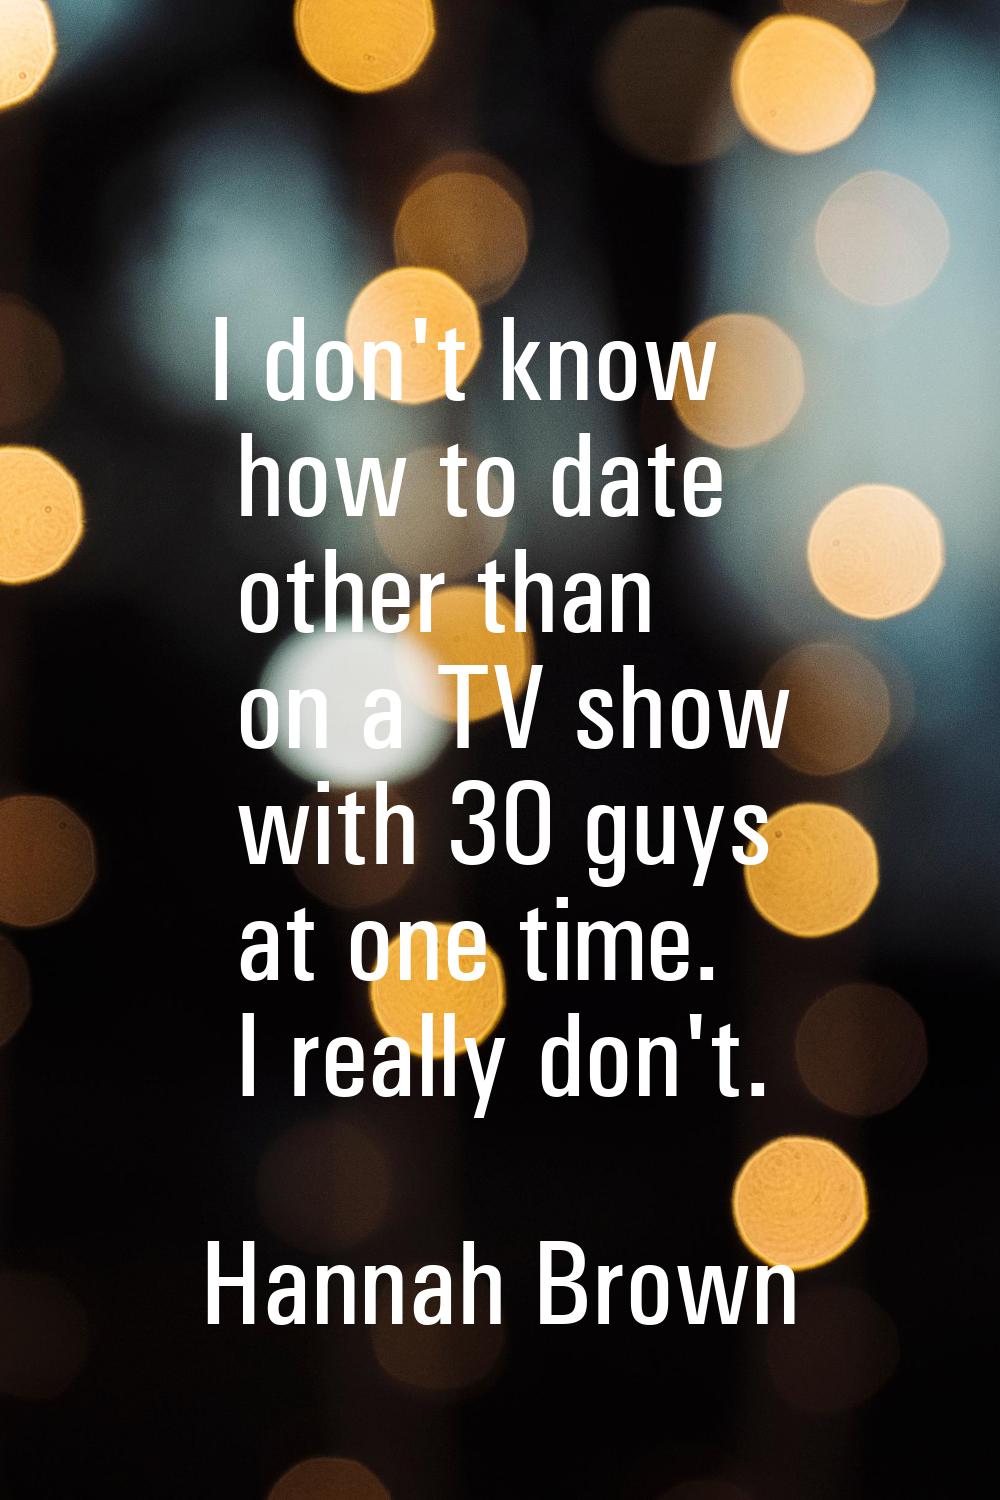 I don't know how to date other than on a TV show with 30 guys at one time. I really don't.